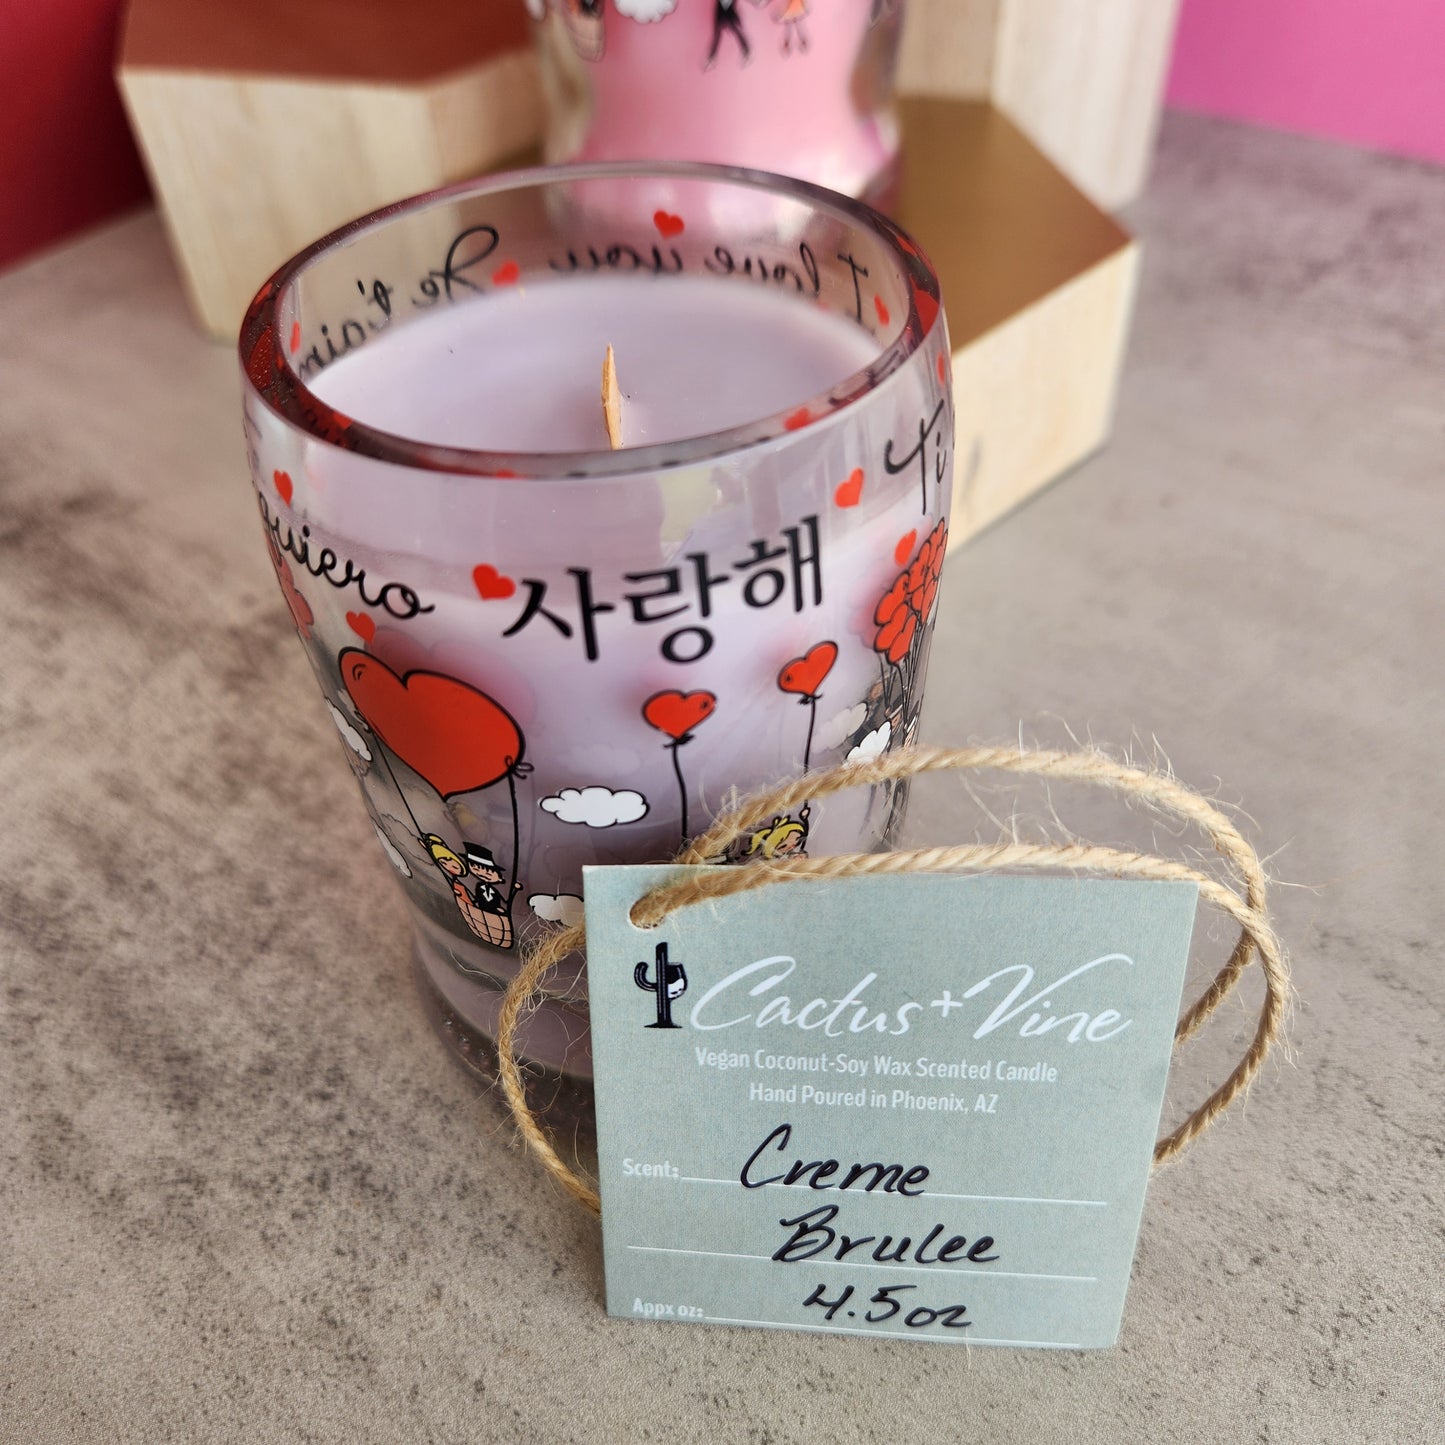 "I Love You" Scented Candle in Mini Wine Bottle